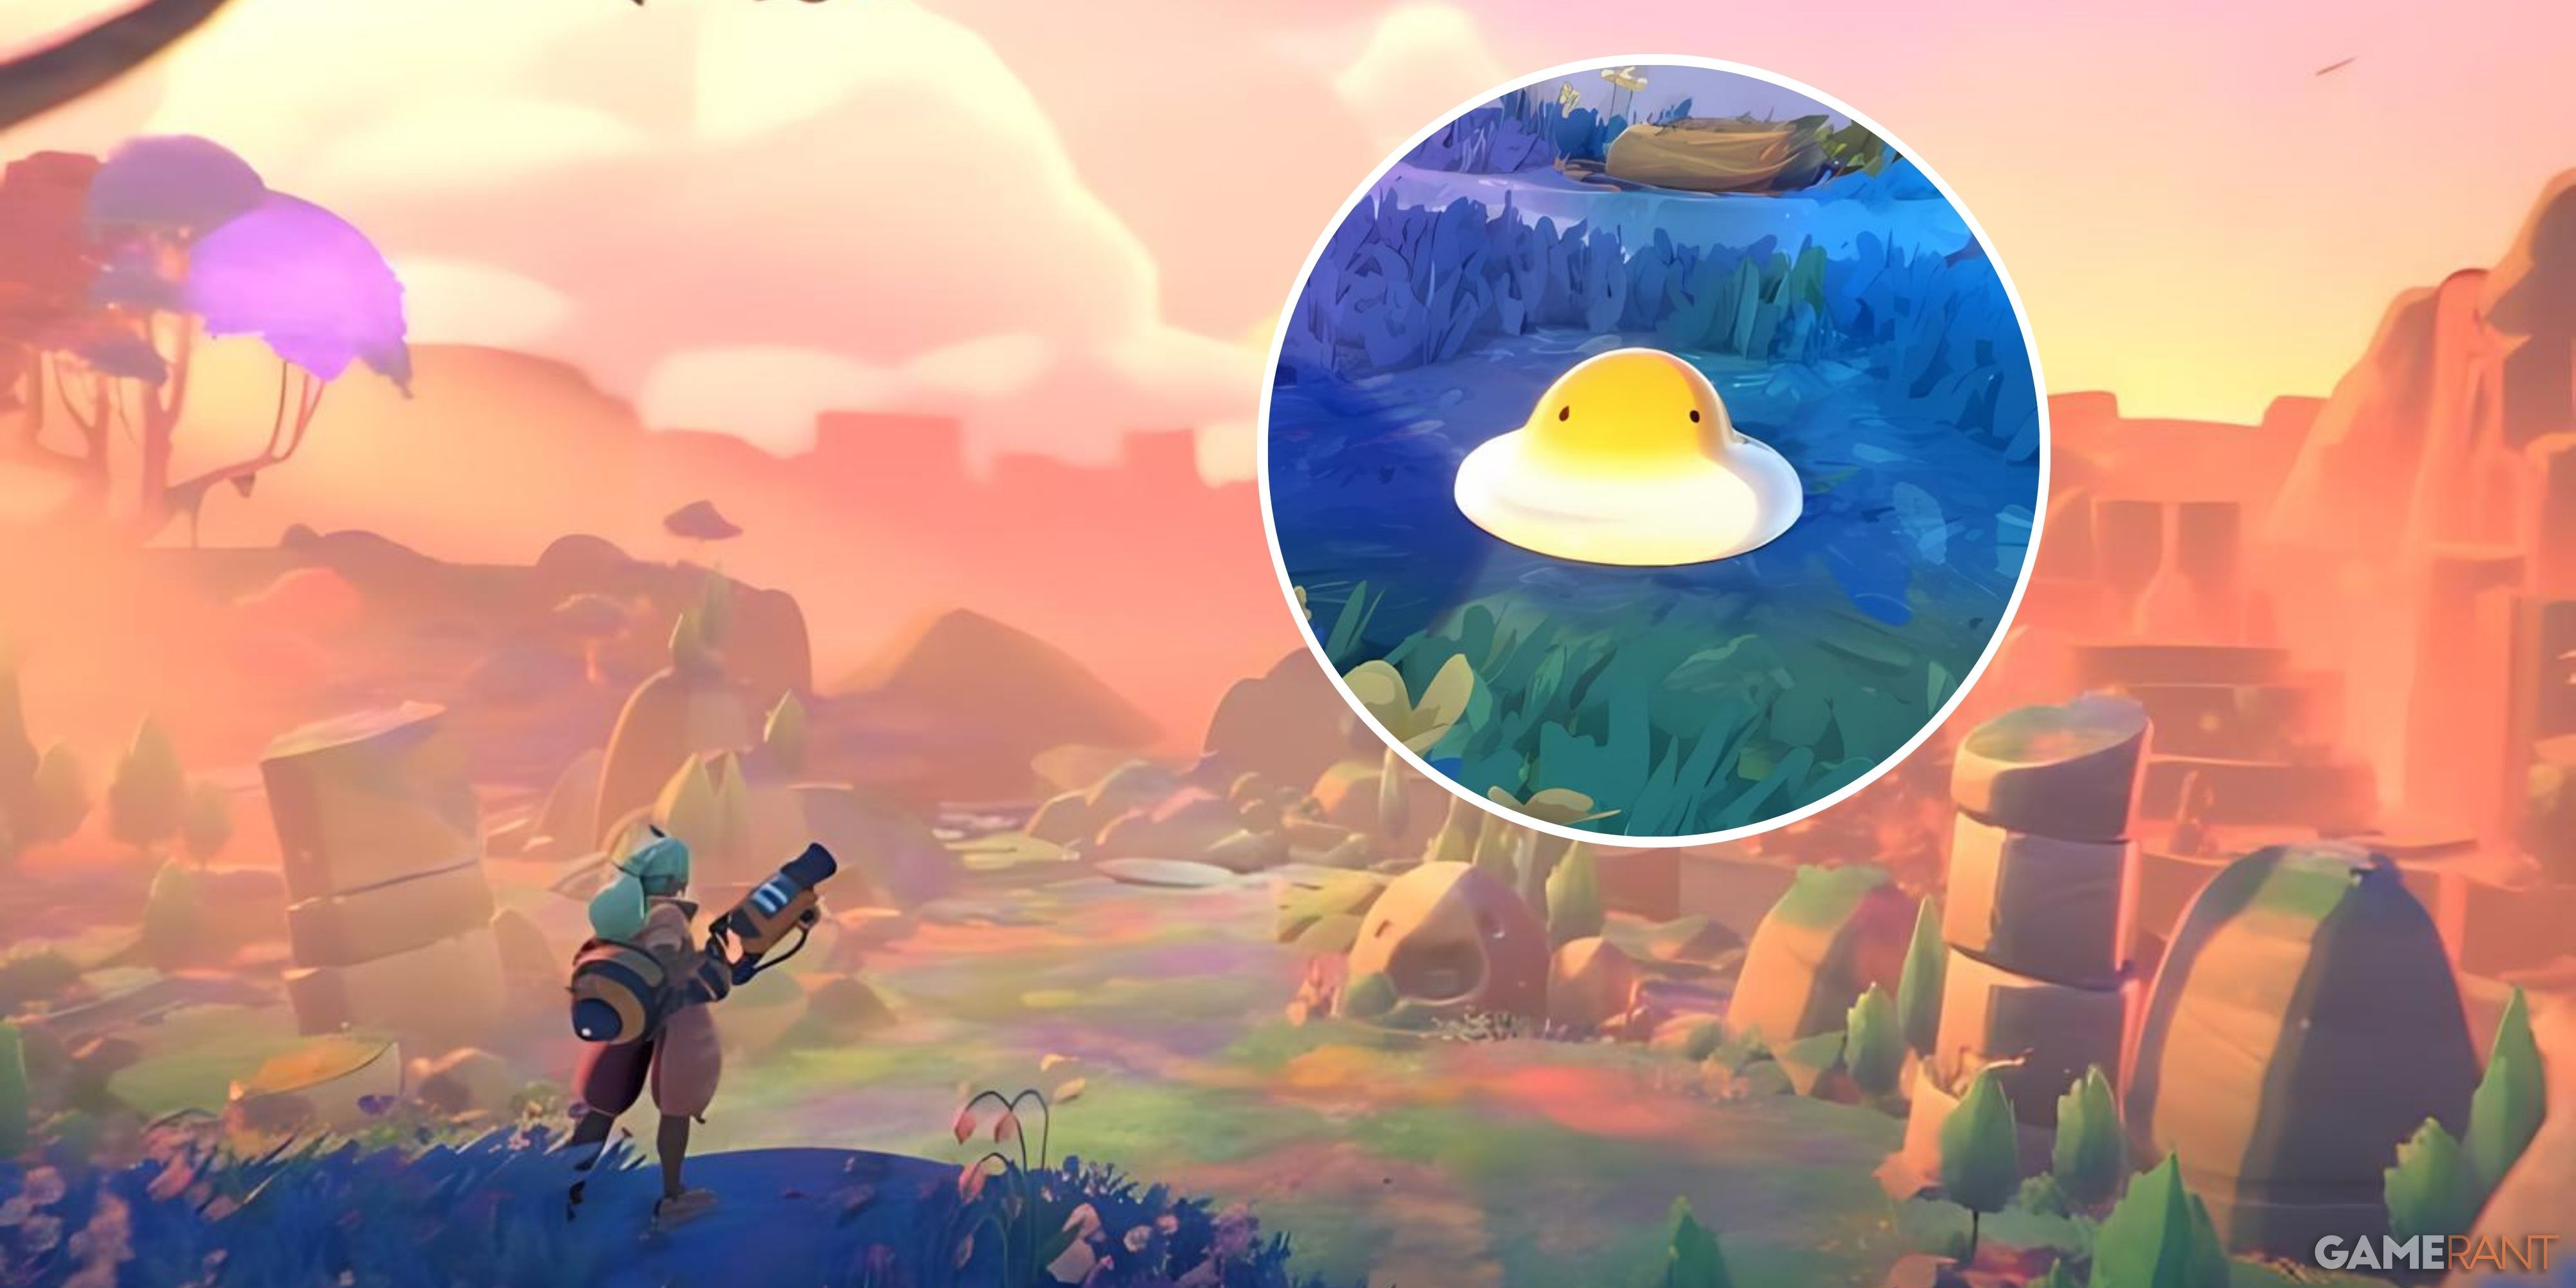 a yolky slime blown up and overlaid over an image from the game's promotional art